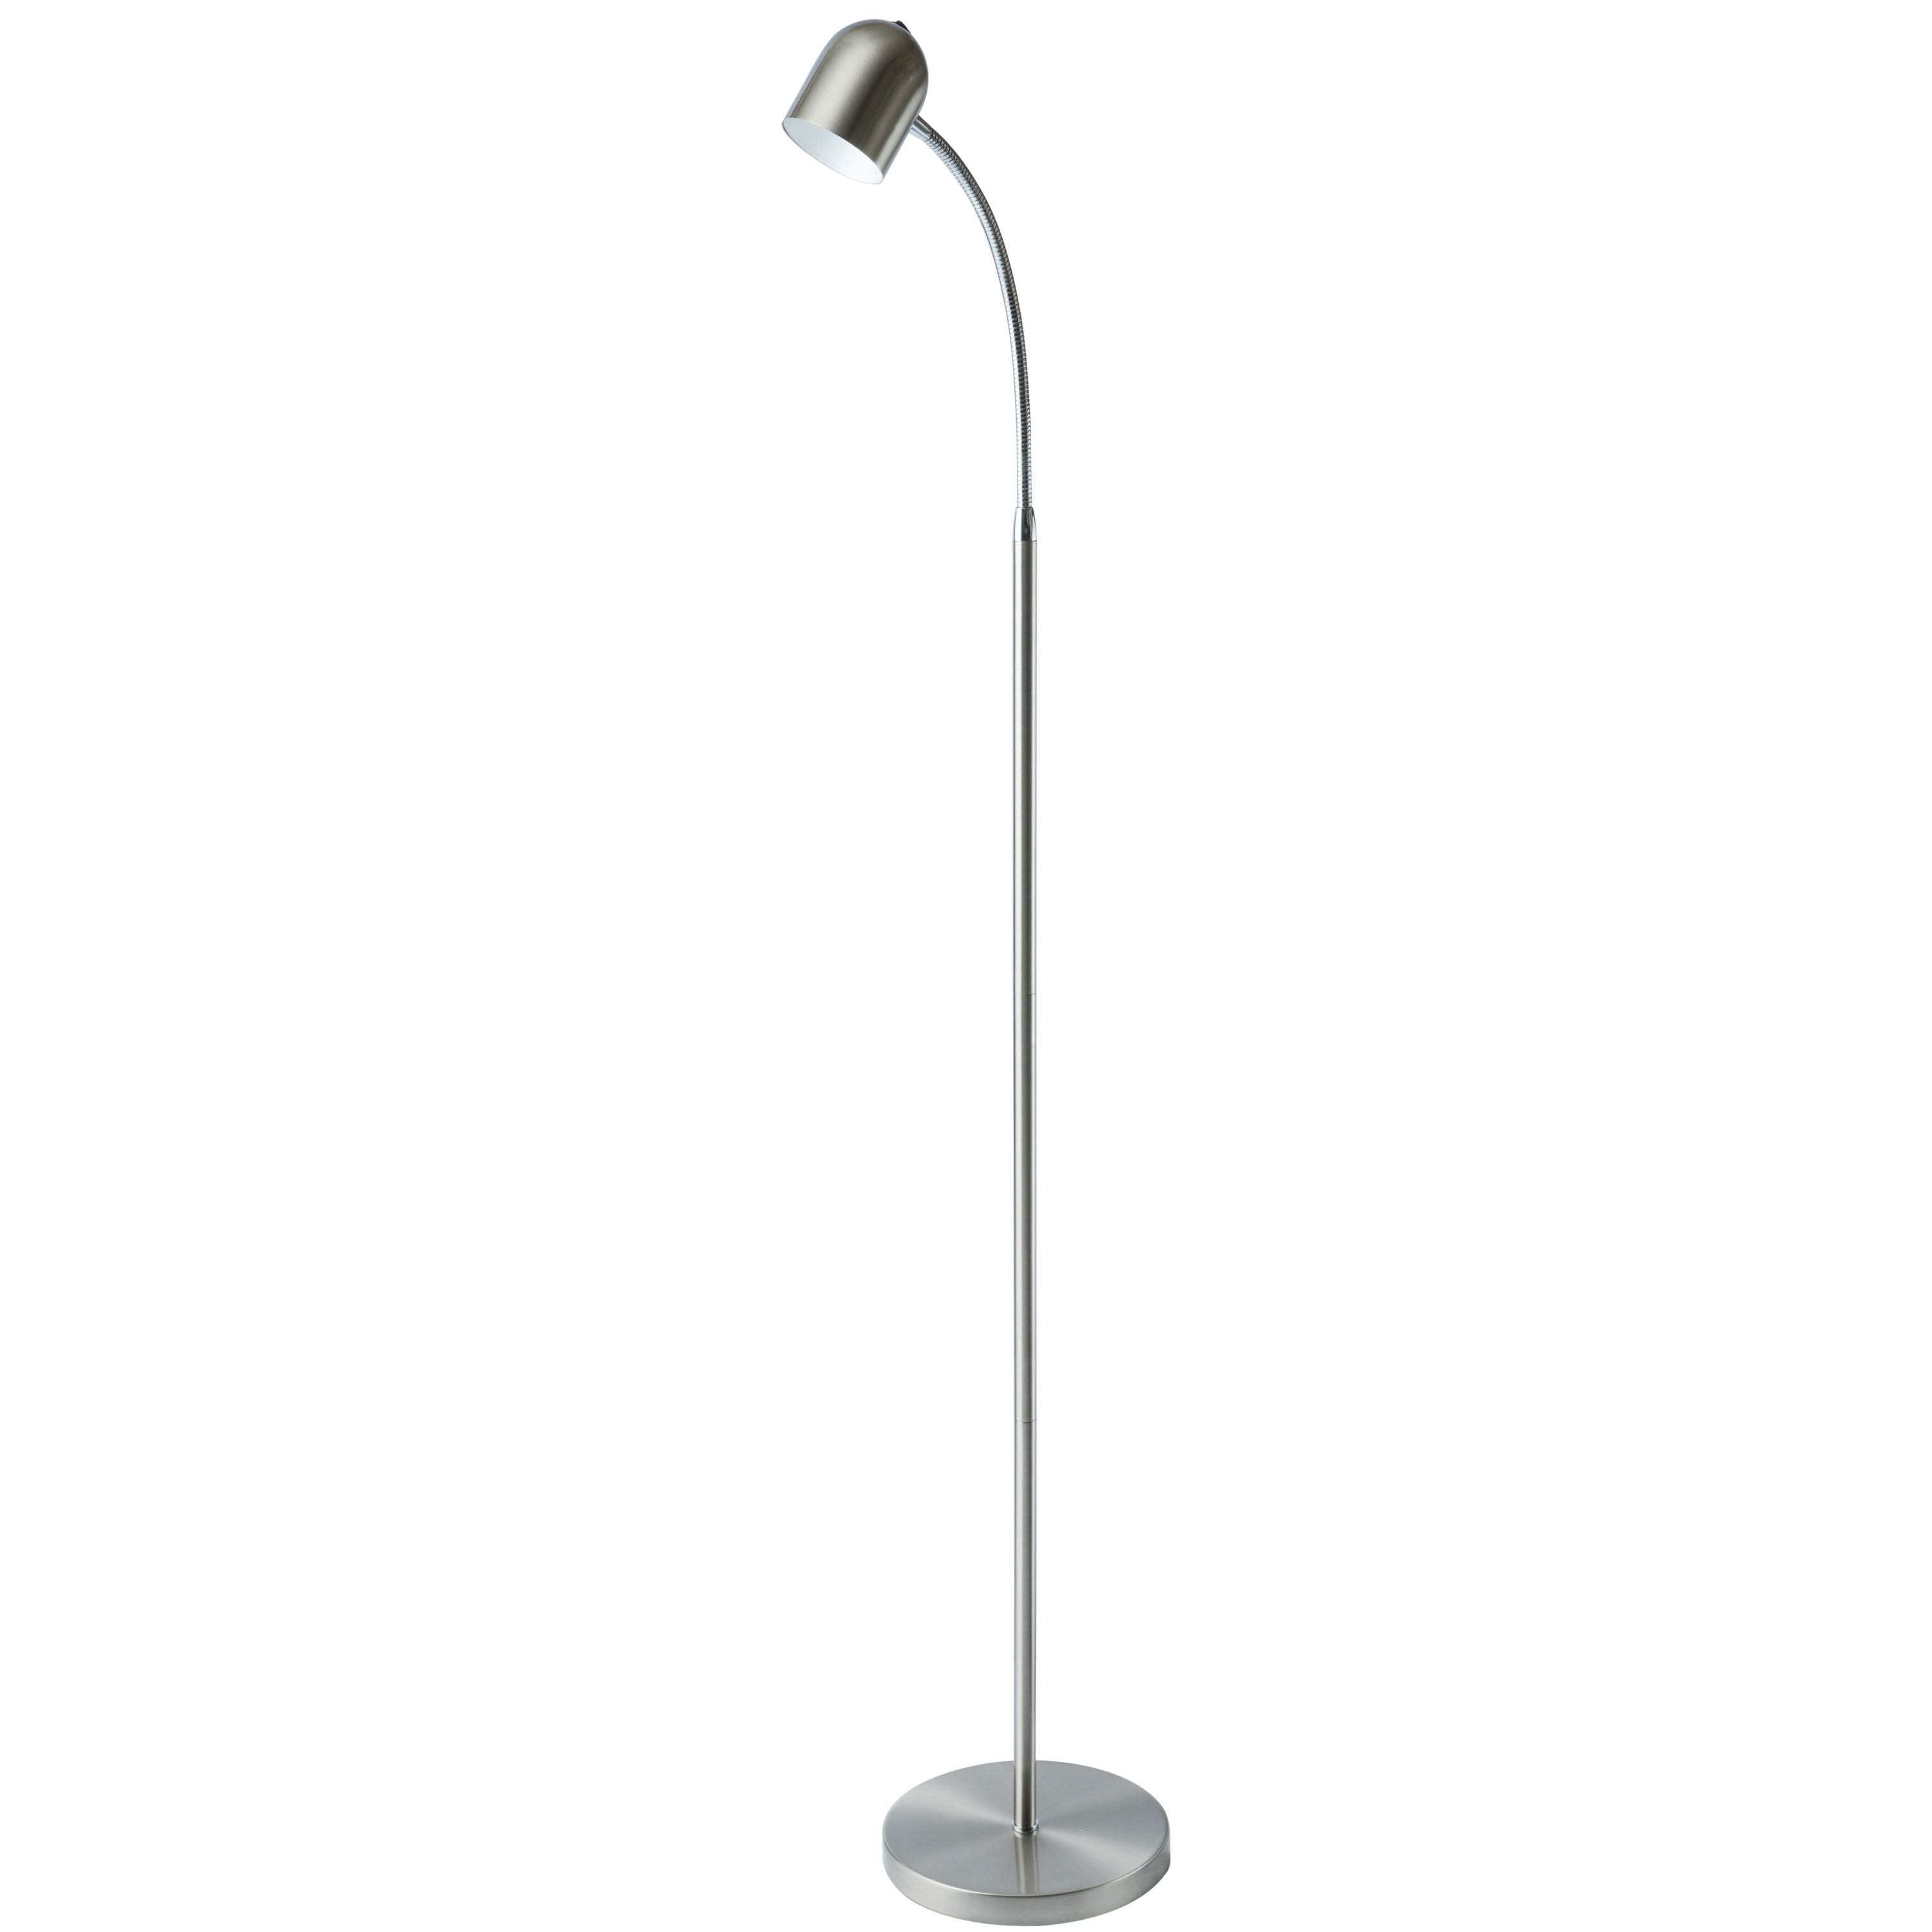 An adjustable construction and slim silhouette make the LED Lamp collection a versatile addition to home or office. The design features an integrated LED light. LED fixtures produce light at up to 90 percent better efficiency than incandescent lighting. The round metal base holds a rod that extend to a bendable arm at the top of the design. A sleek metal light housing, with a choice of finishes, complete the contemporary look. With its adjustable design and stylish, yet discrete profile, LED Lamps will add welcome light in virtually any corner of your home from living room to office space.